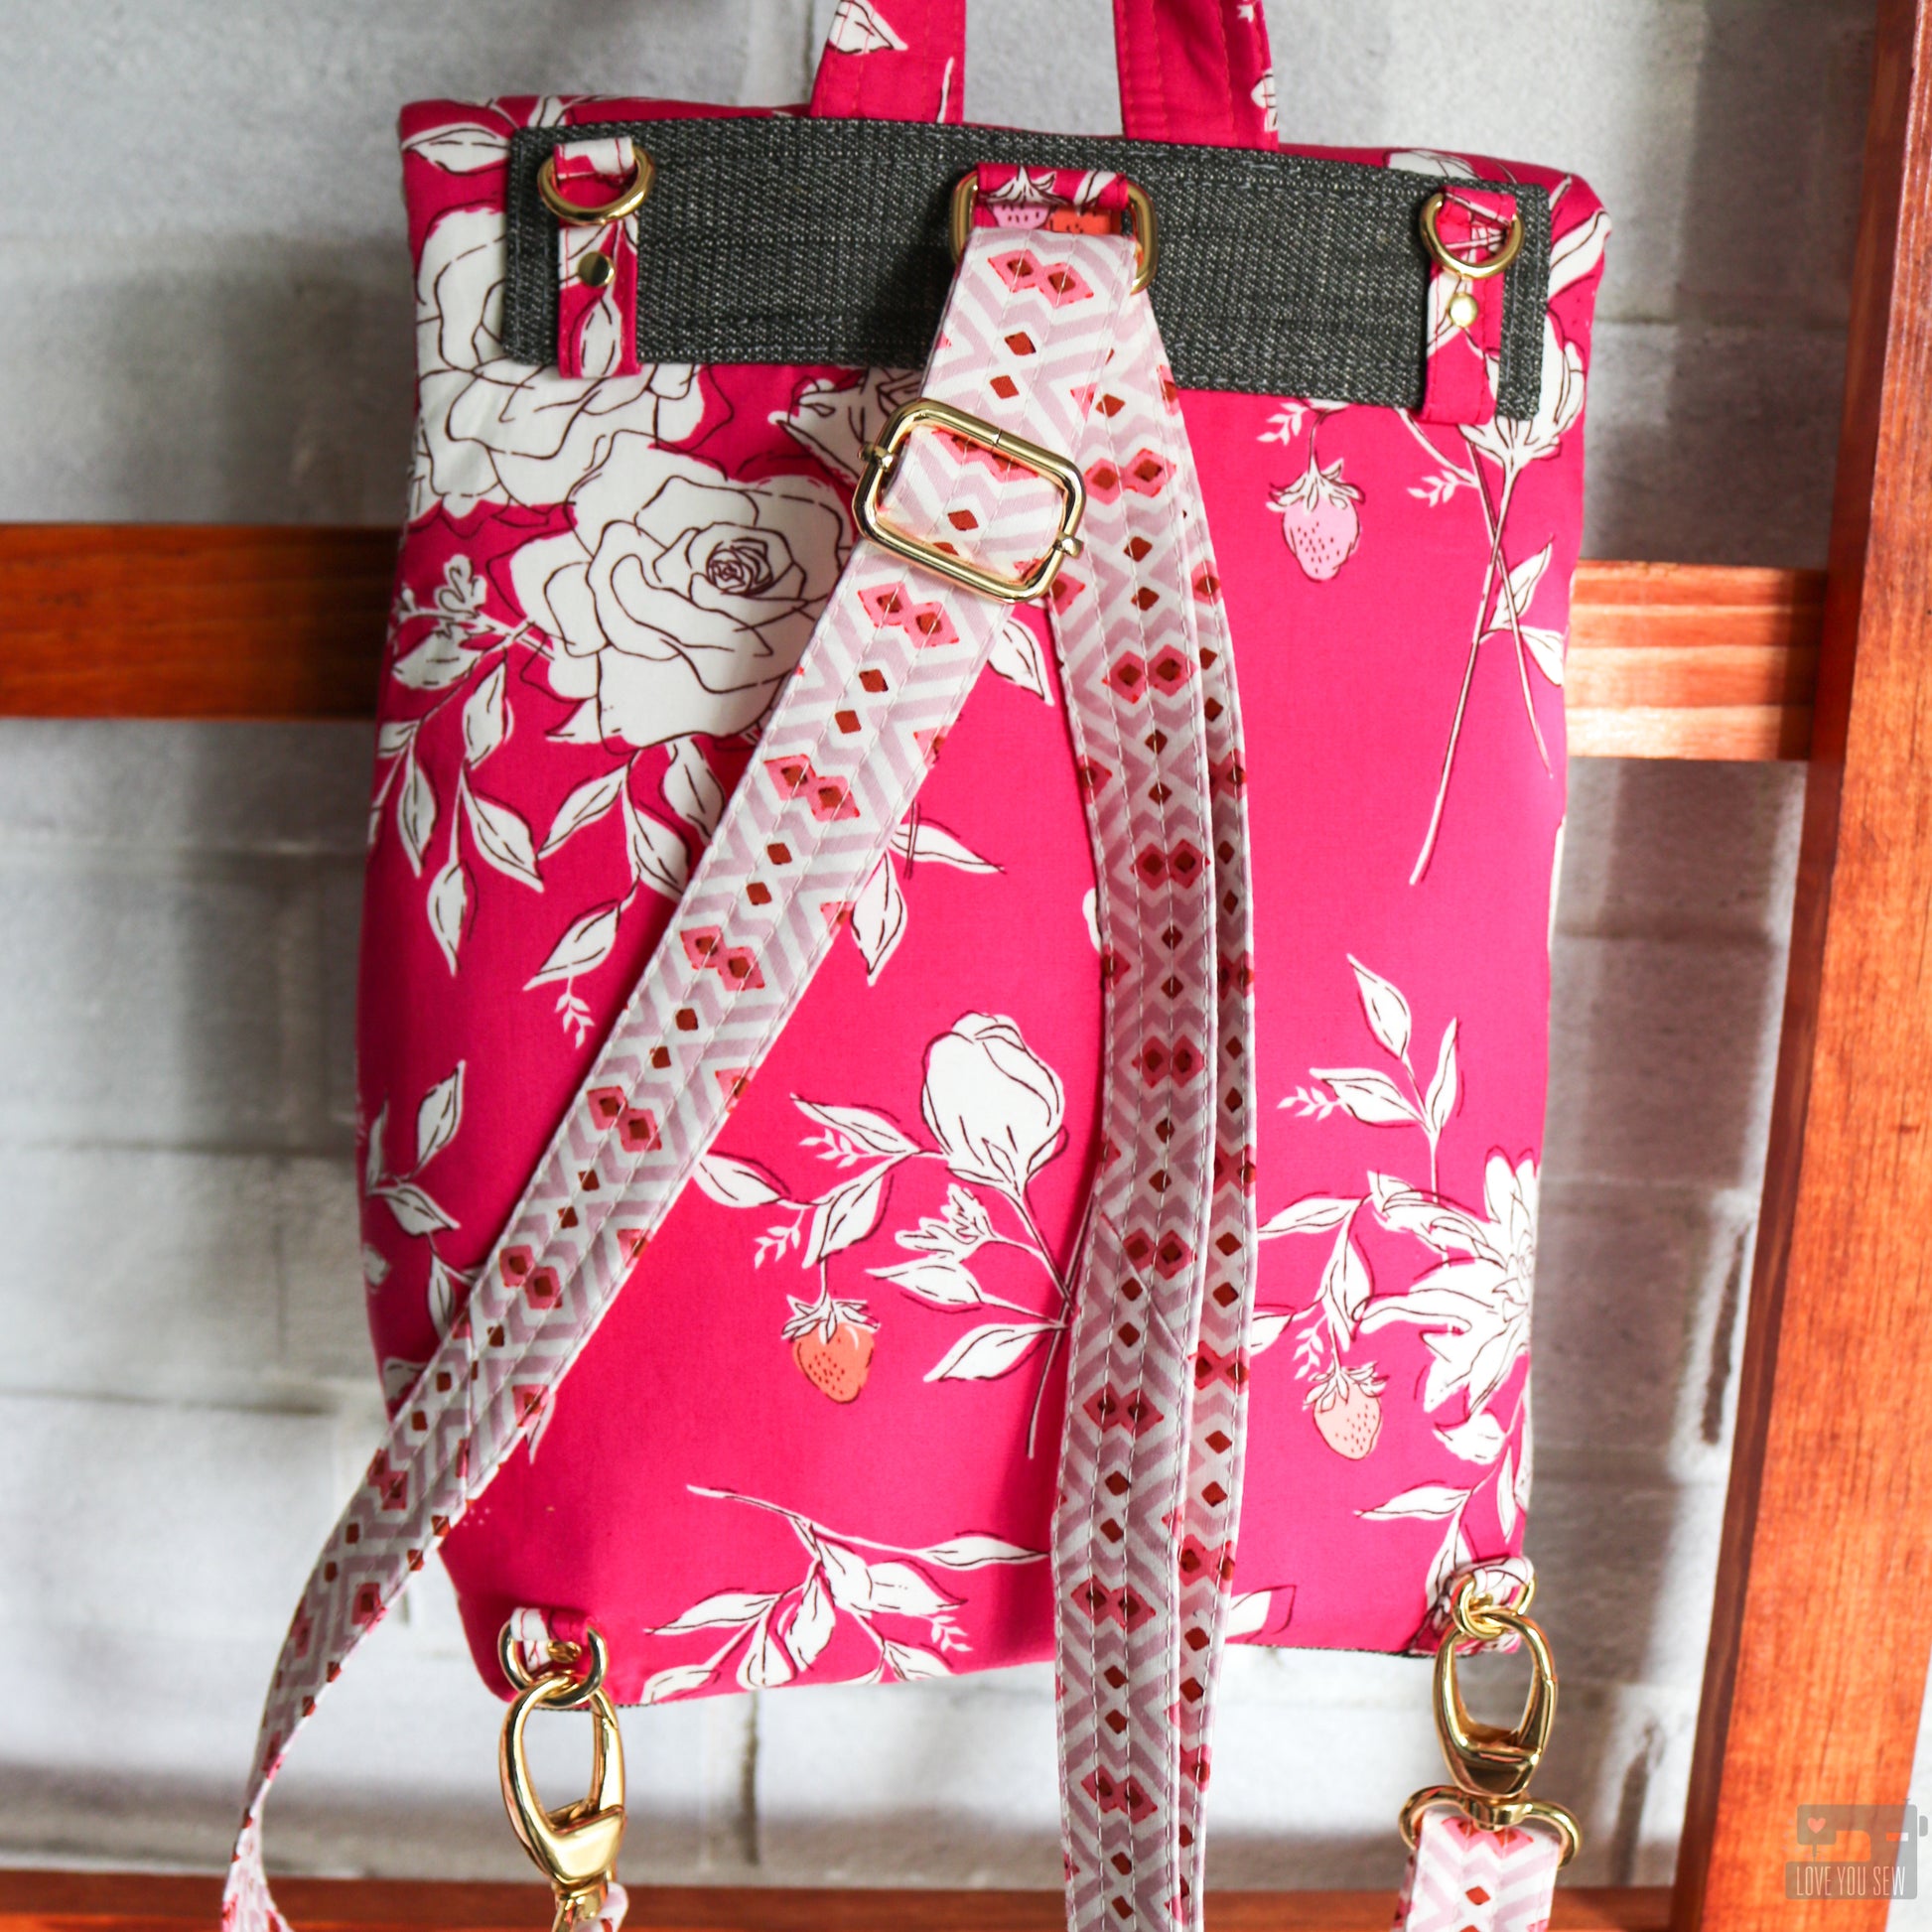 Sew A Convertible Backpack Tote - free sewing pattern!